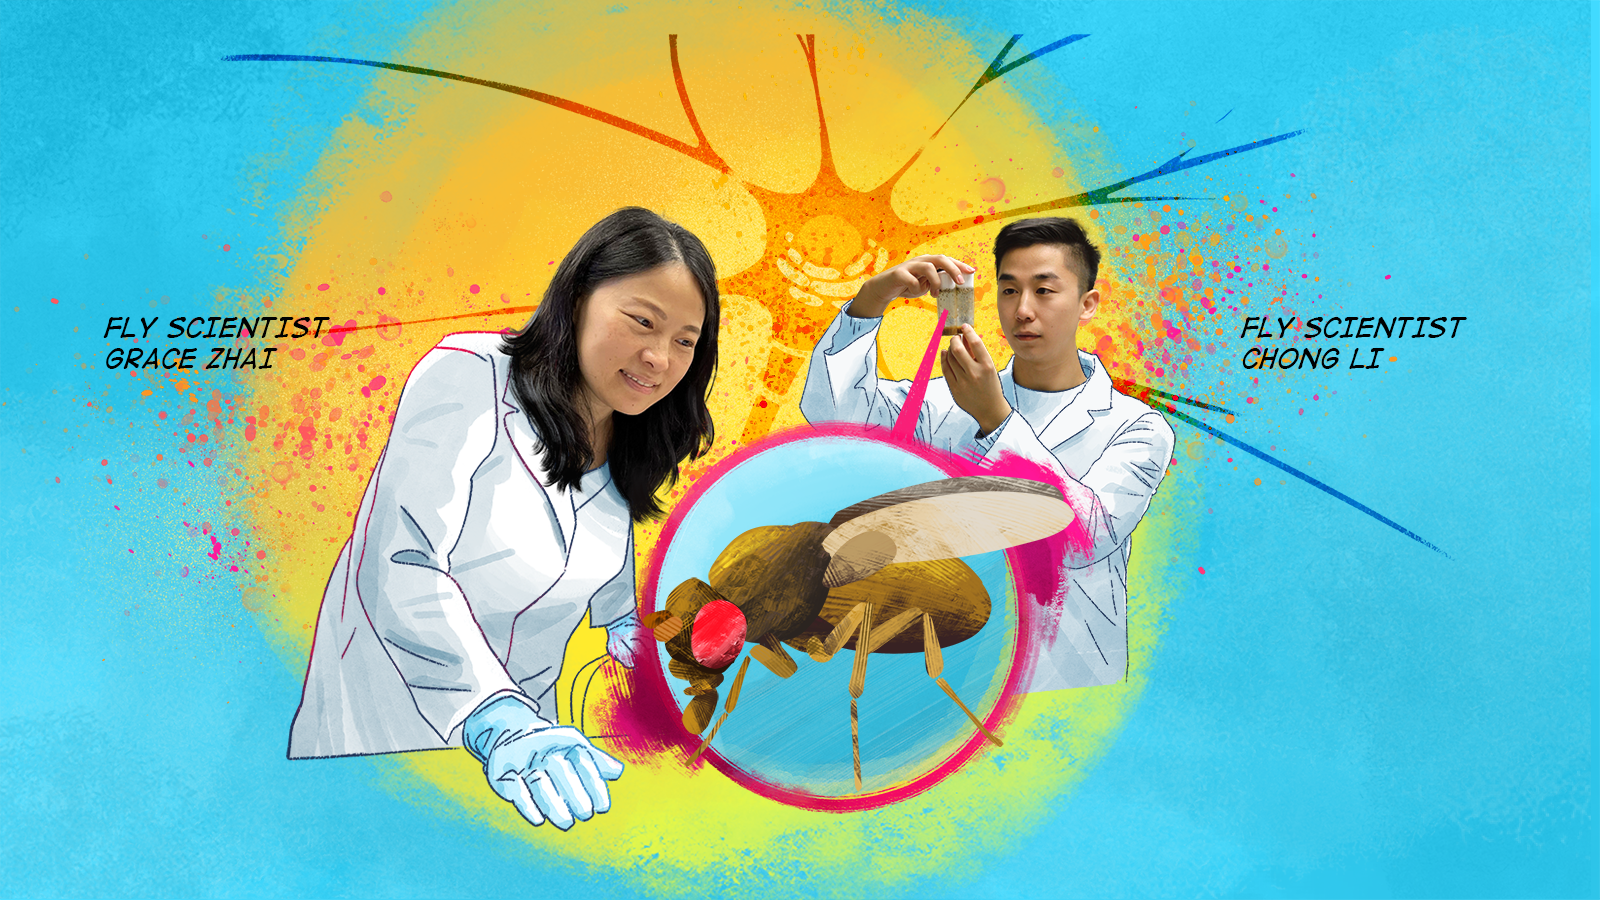 Illustrations of scientists Grace Zhai and Chong Li with an image of a fly.